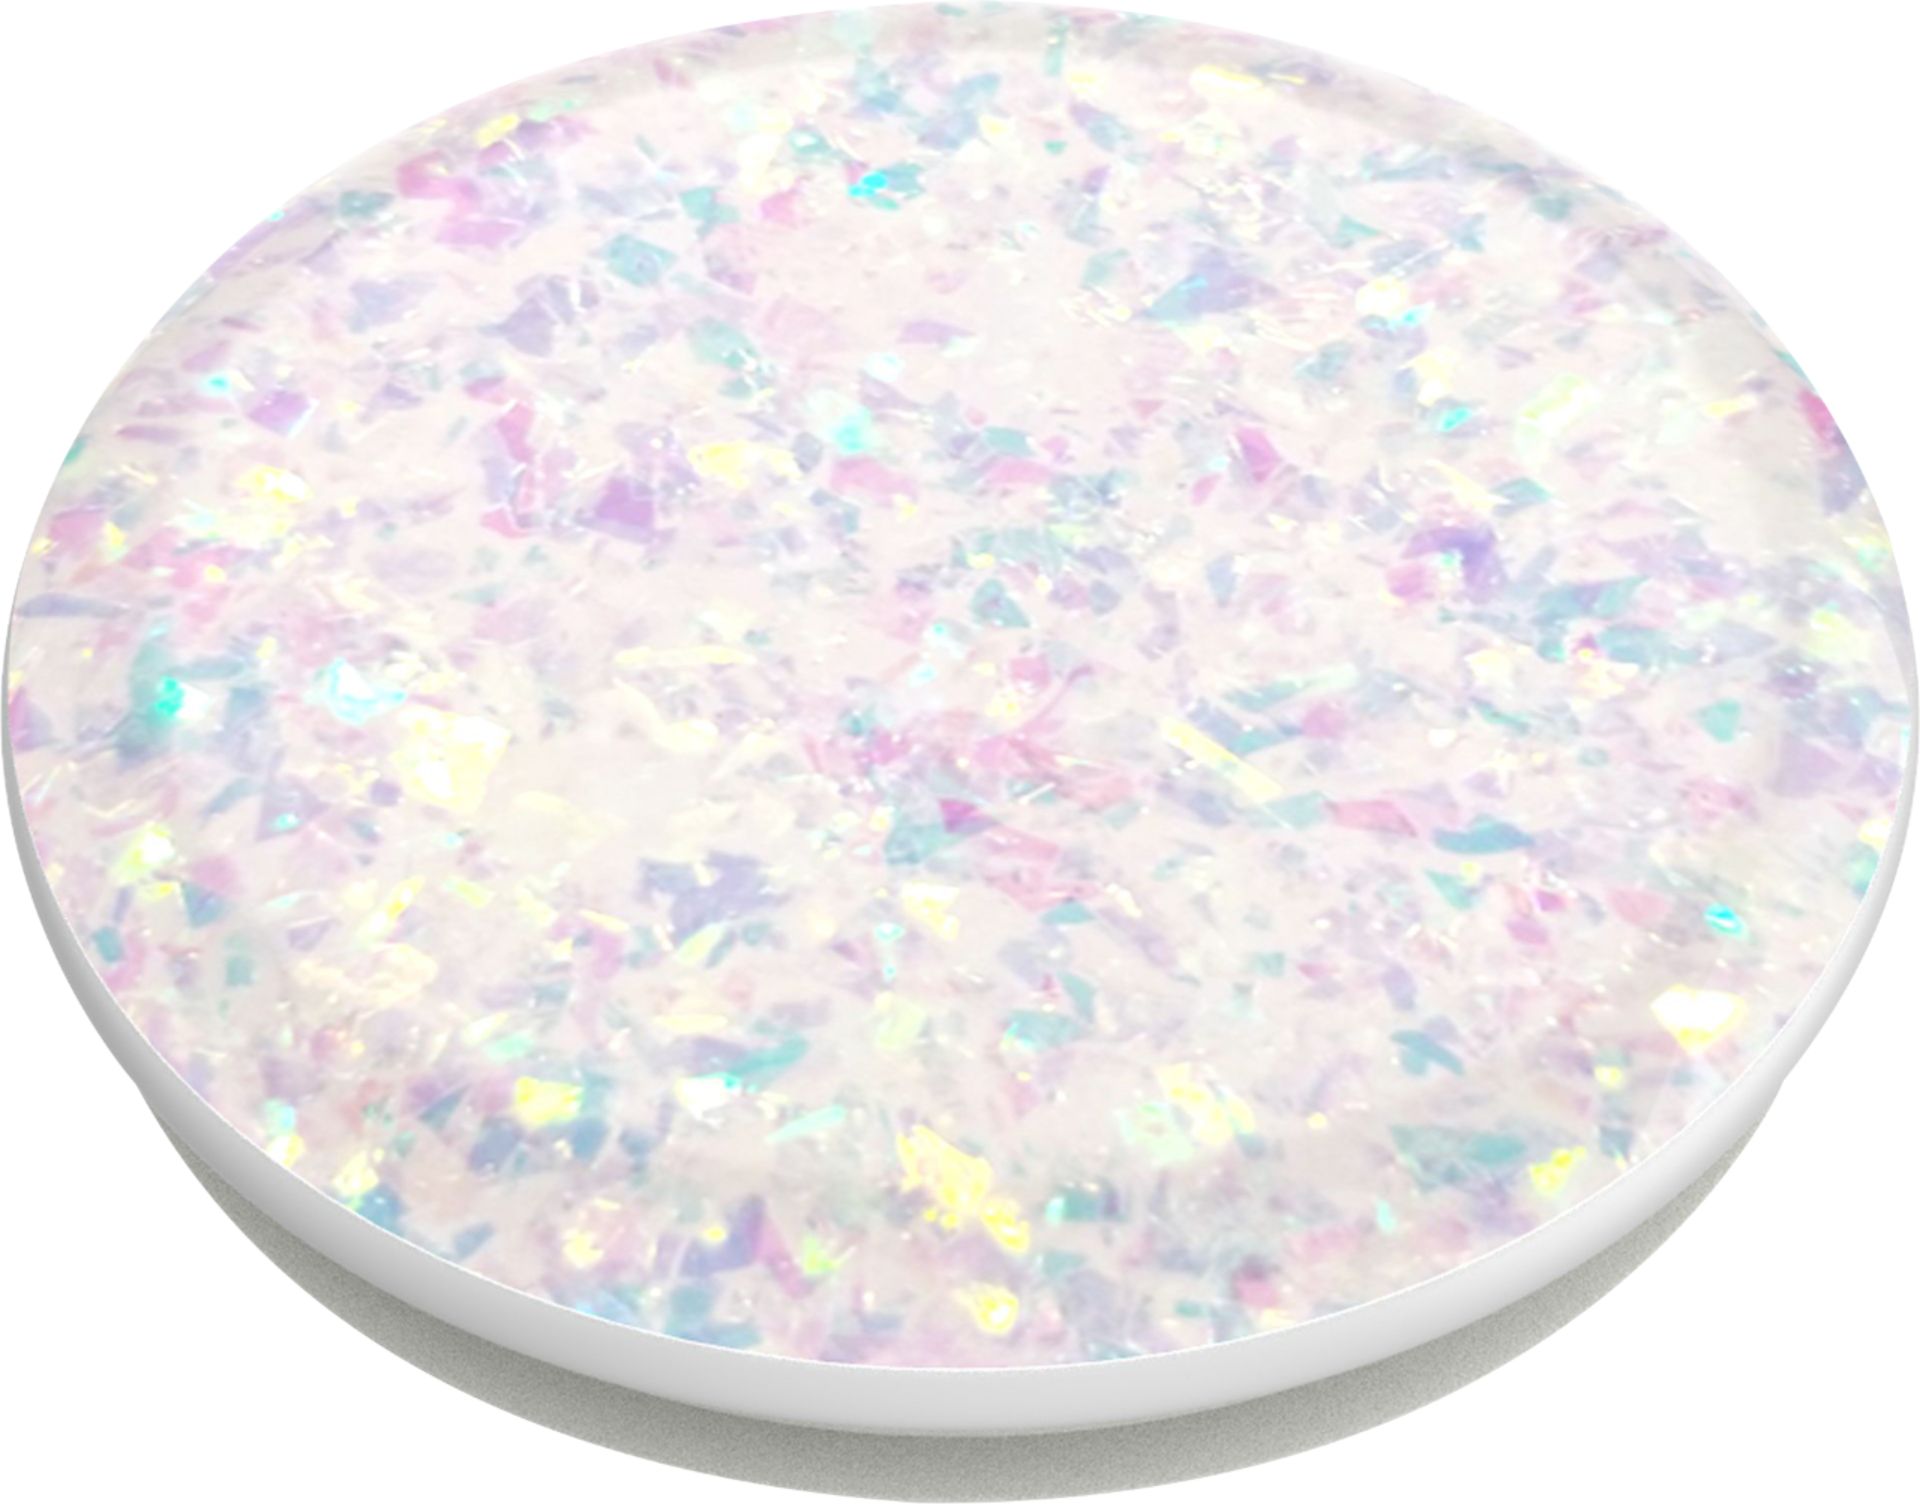 Left View: PopSockets - PopGrip Premium Cell Phone Grip and Stand - Iridescent Confetti White